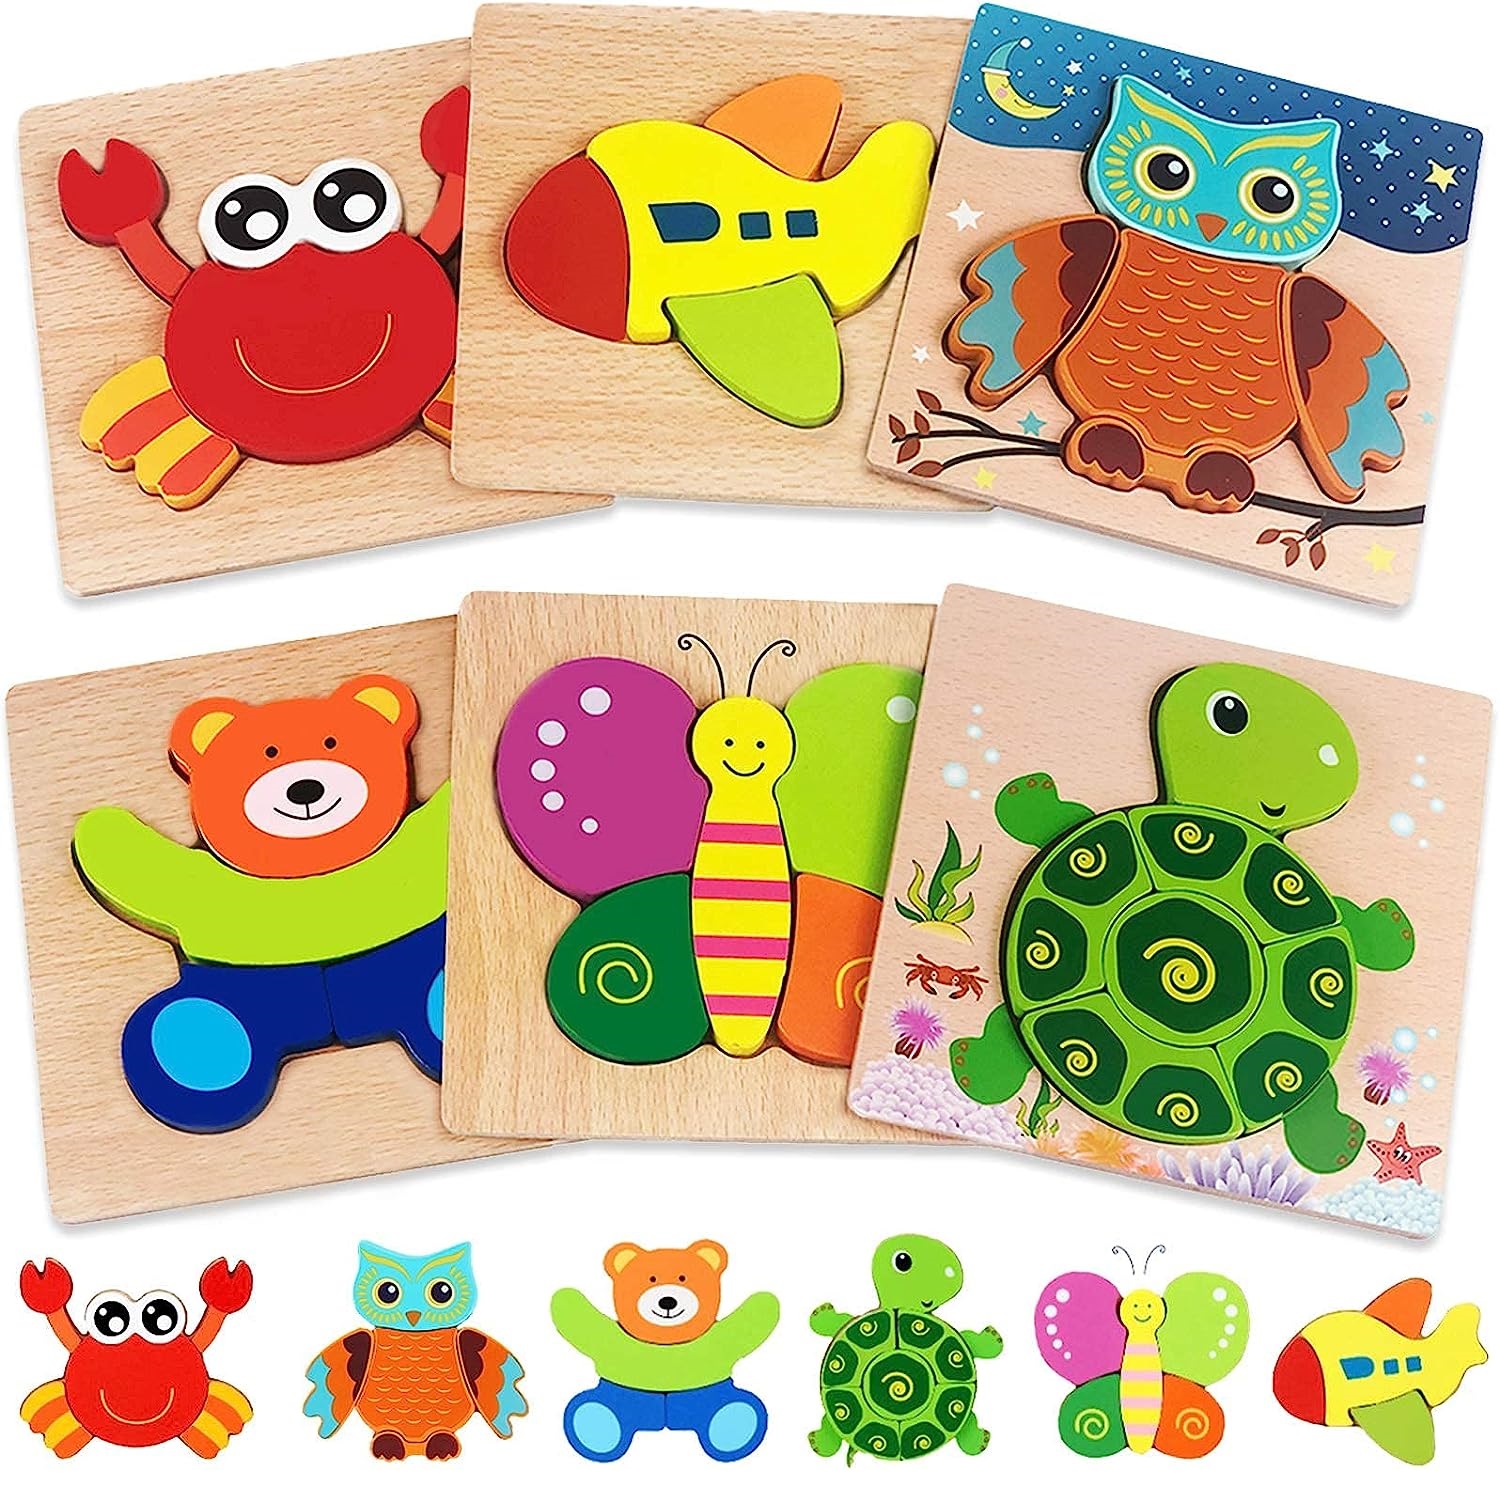  Wooden Puzzles for Toddlers 1-3, 6 Pack Peg Puzzles